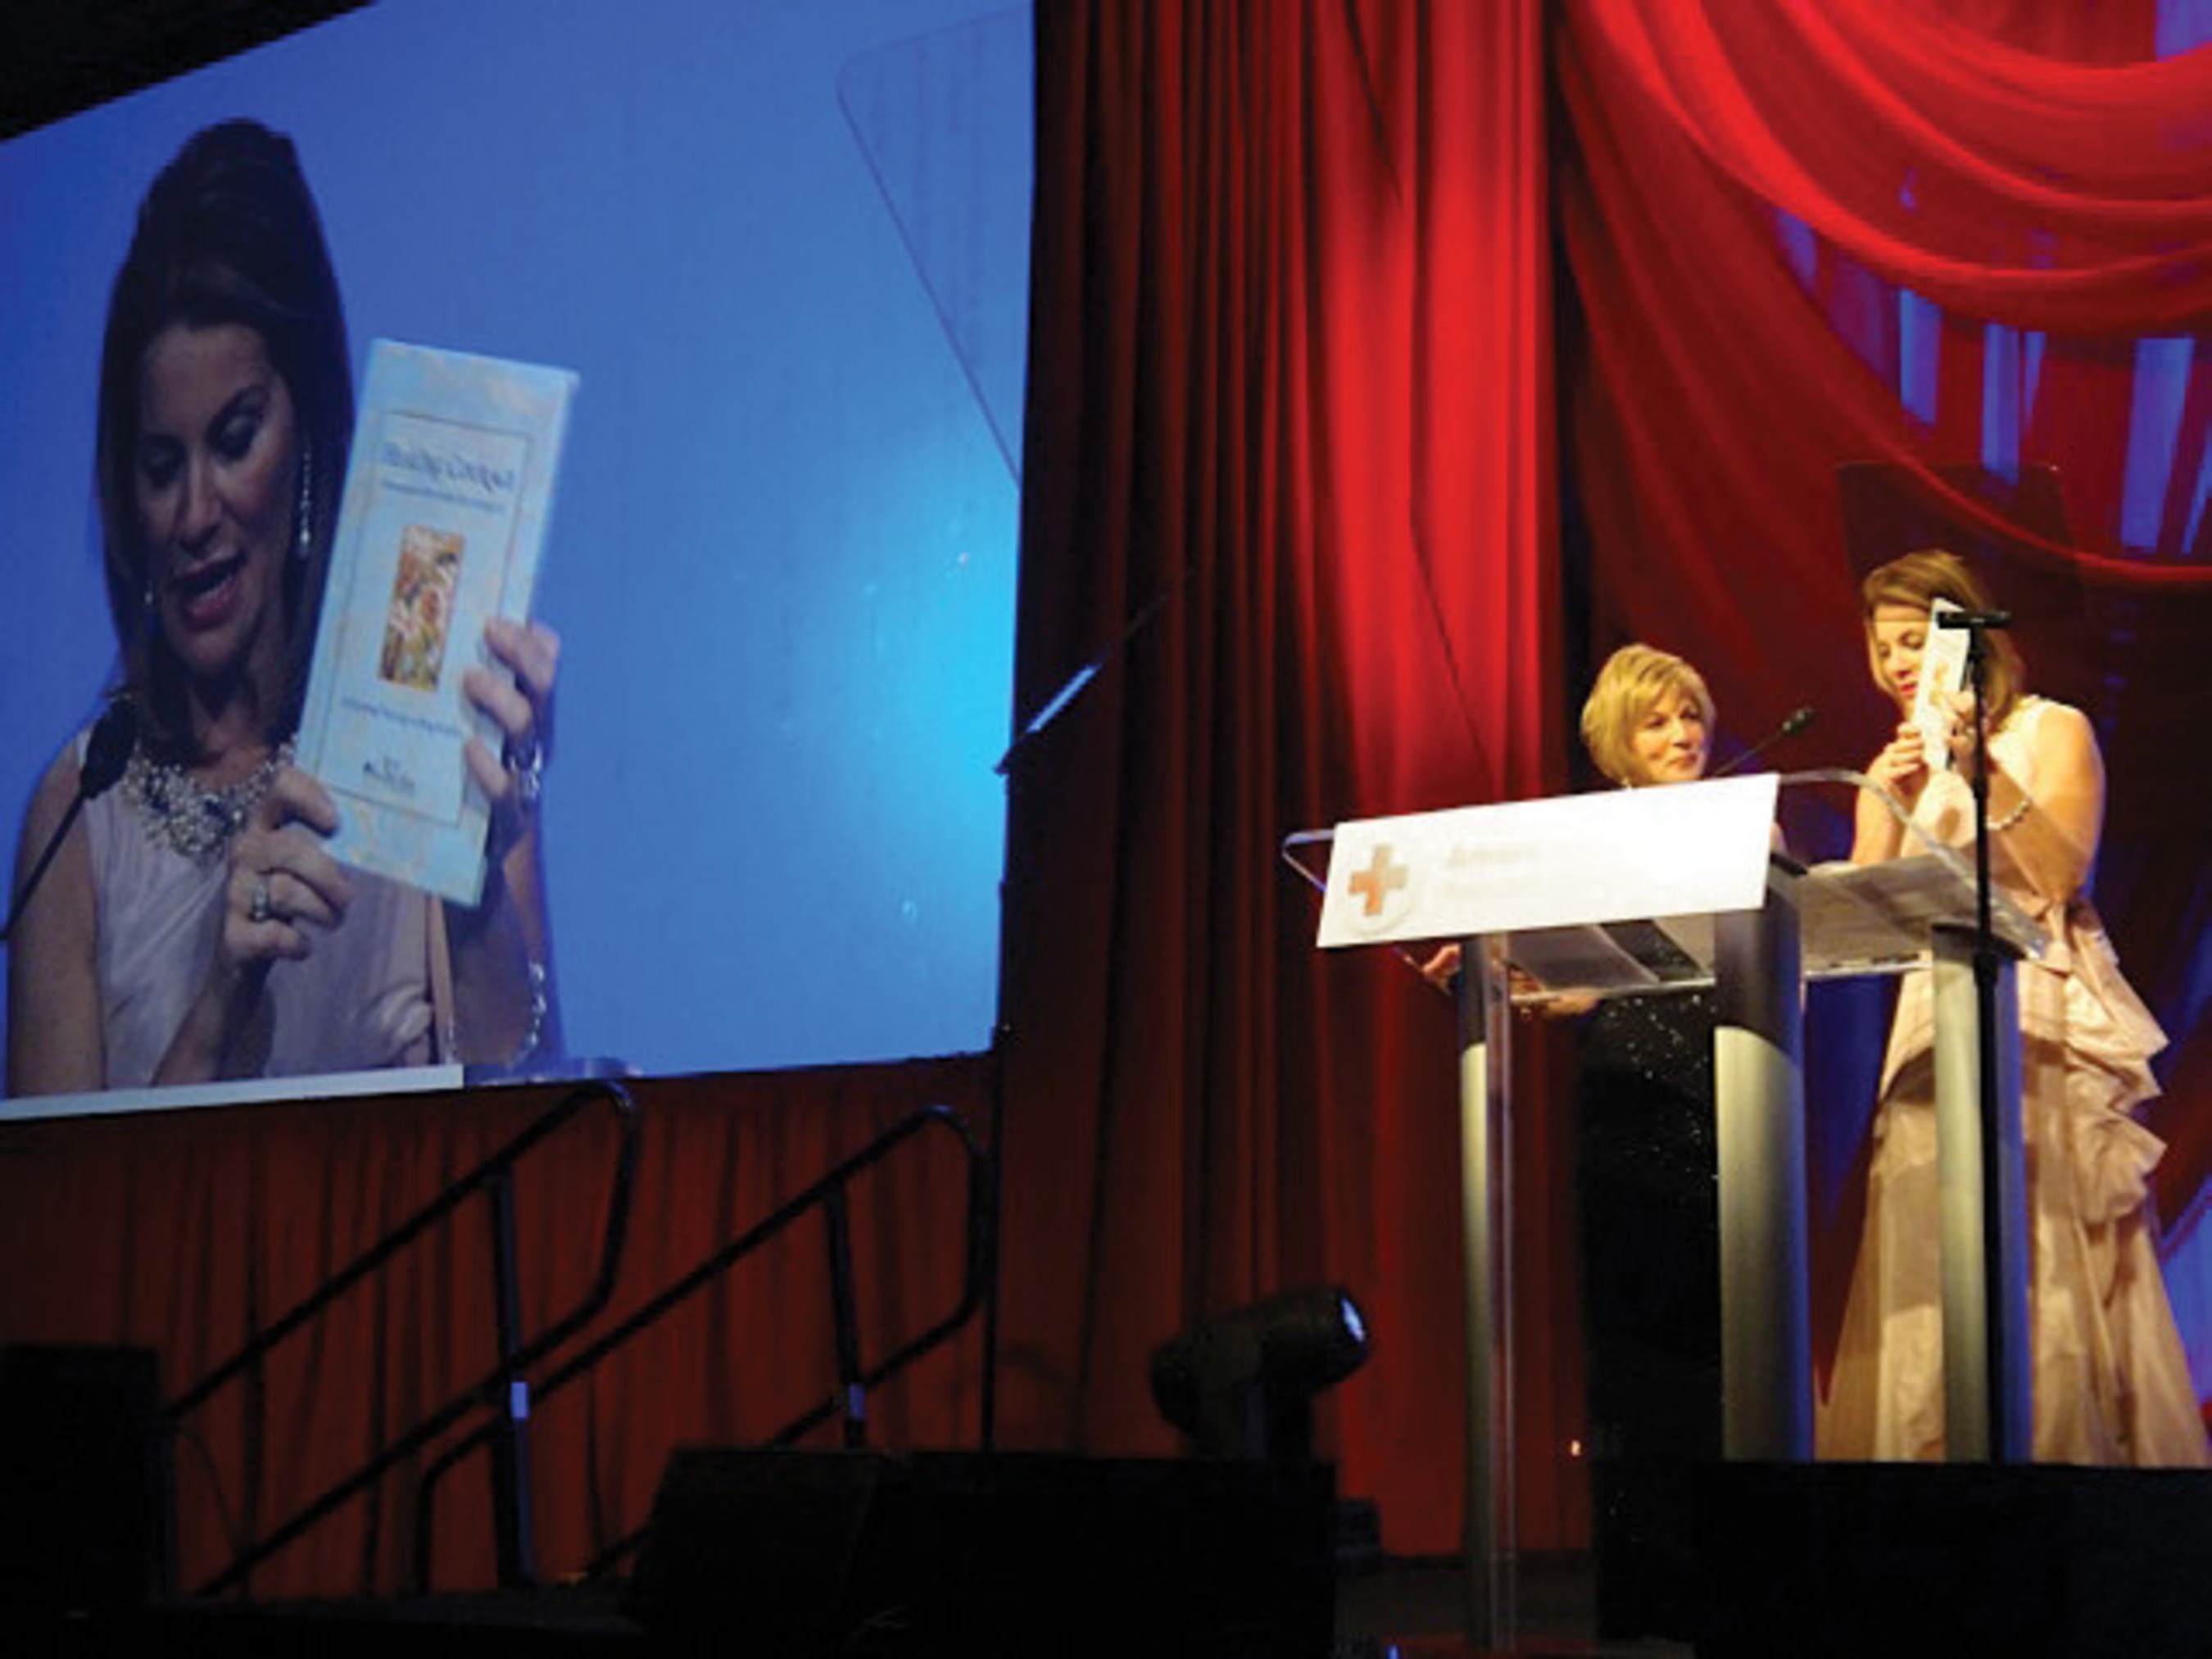 Teresa Carlson, Chairman of the Board of the American Red Cross in the National Capital Region, presenting the Light of Healing Hope Foundation's newest publication, Healing Courage by Alexandra Villard de Borchgrave, at the Red Cross Salute to Service Gala on October 18, 2014. The Light of Healing Hope Foundation offered the book as gifts to the event to support the Red Cross and all Service Members and their families.